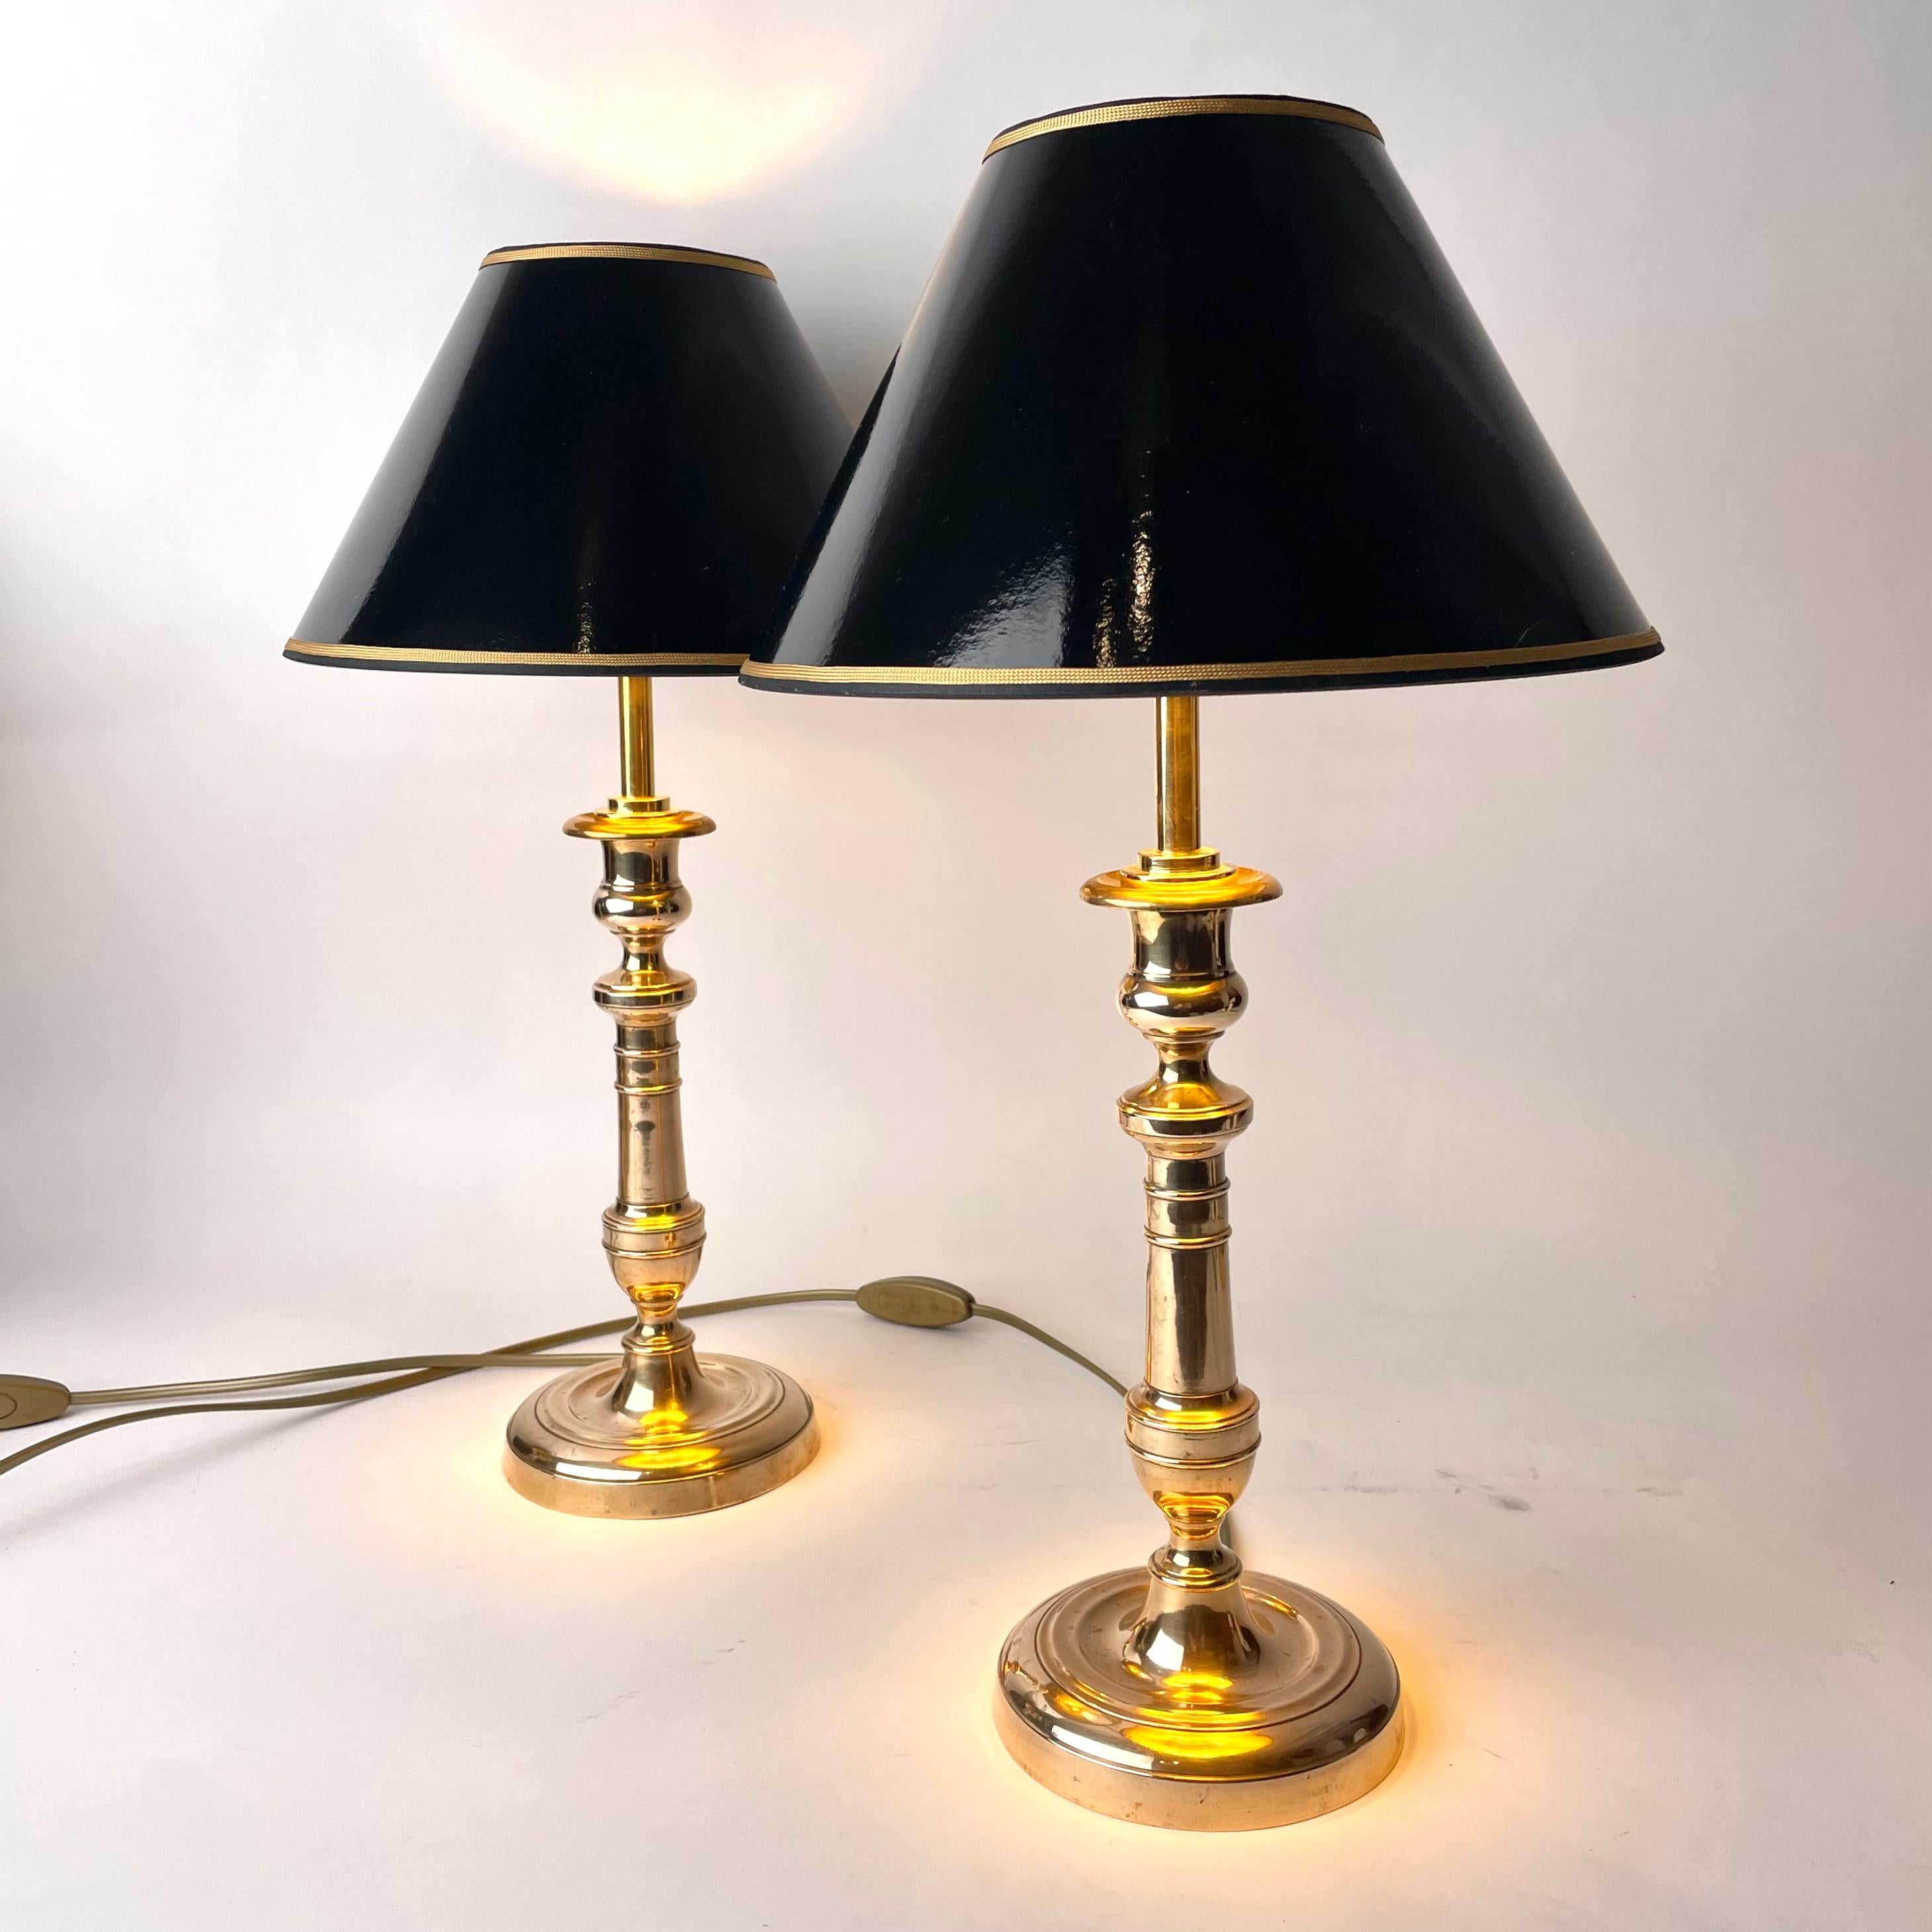 European A Pair of Table Lamps in Brass, Late Empire